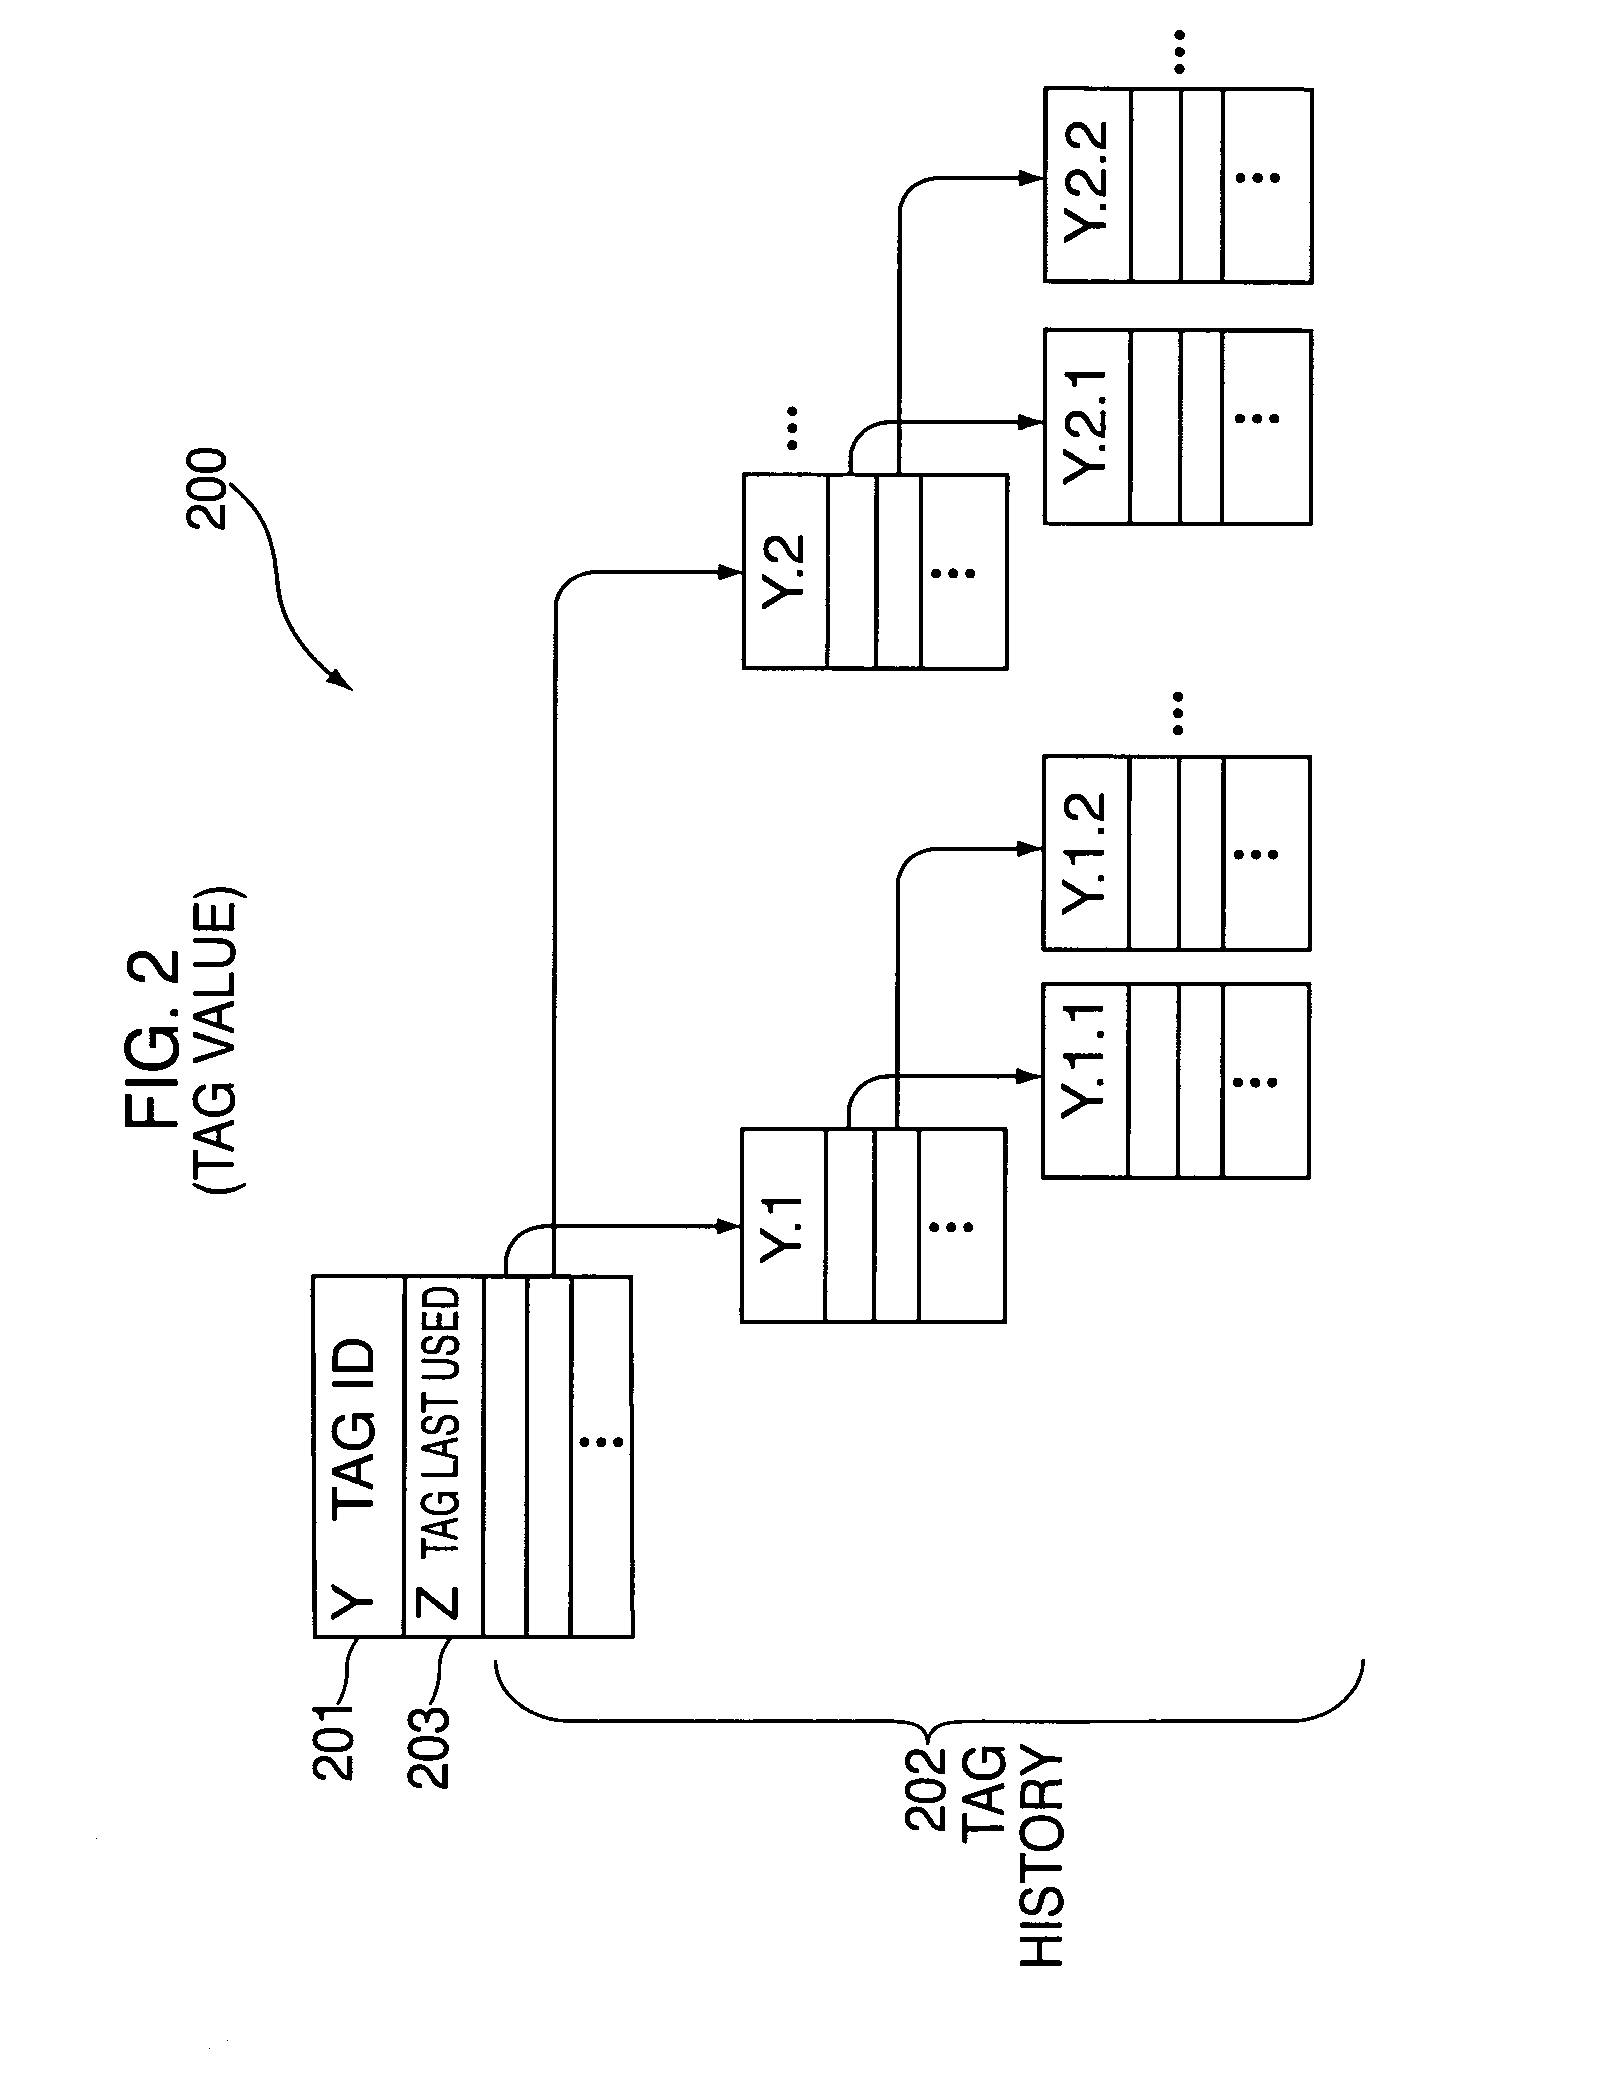 Method and apparatus for observability-based code coverage